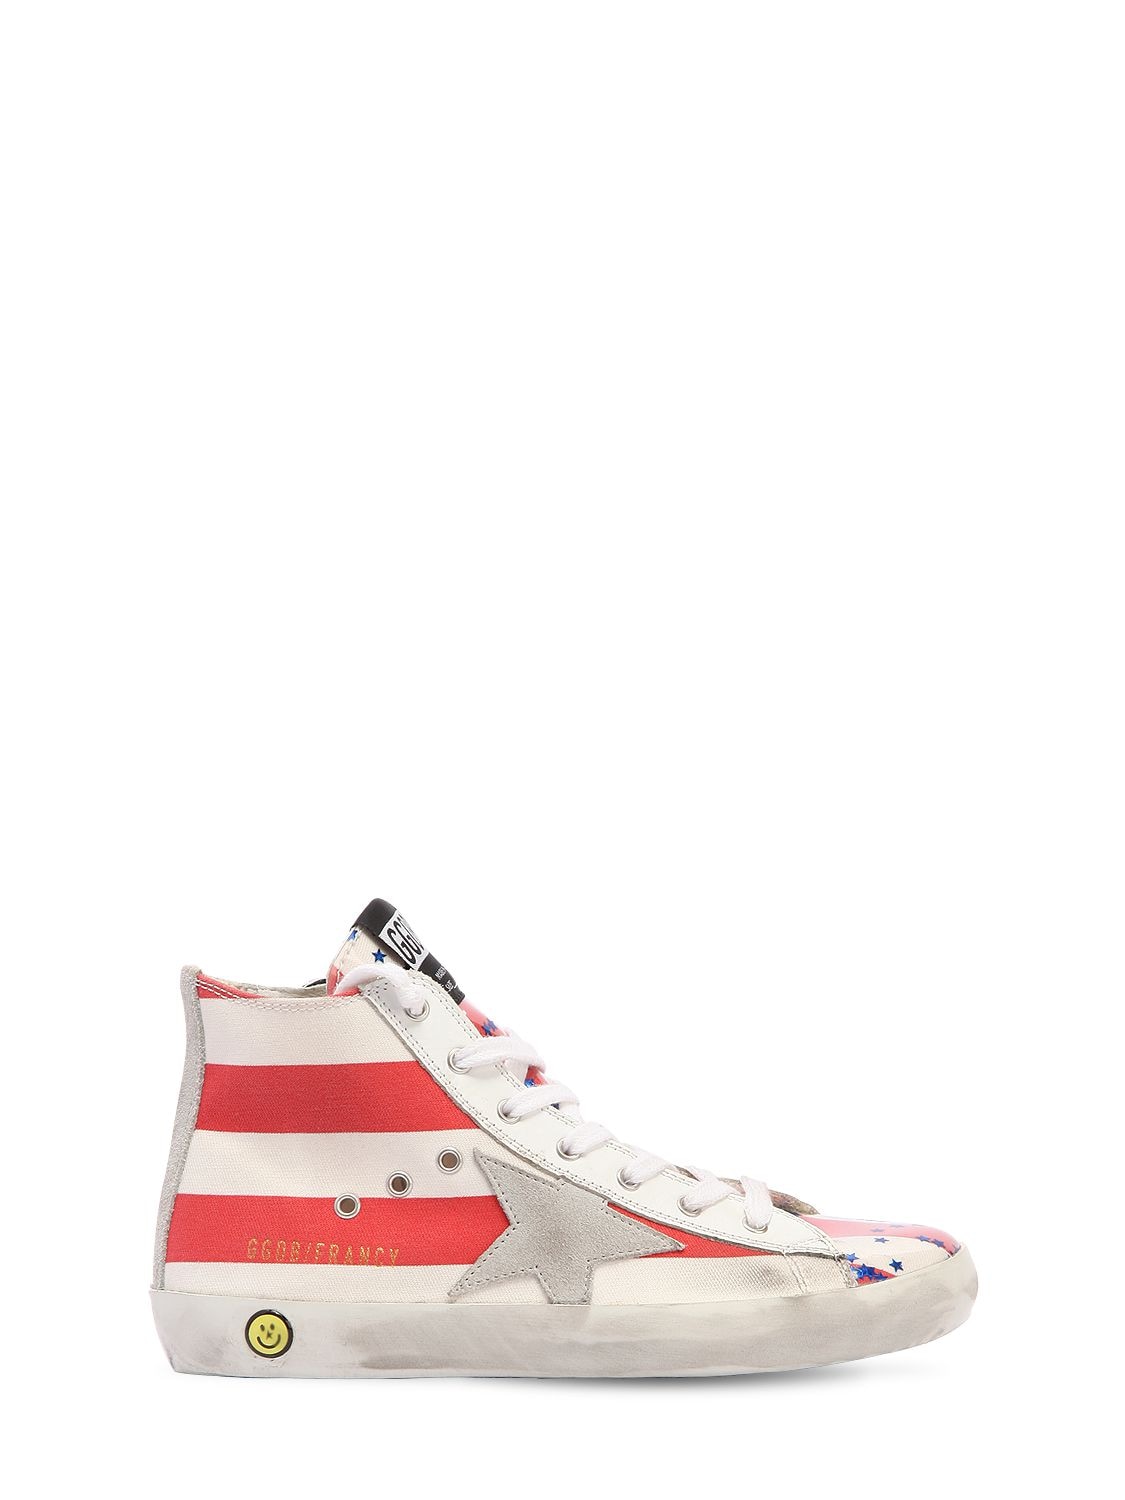 Golden Goose Kids' Francy Stars Canvas High Top Sneakers In White,red